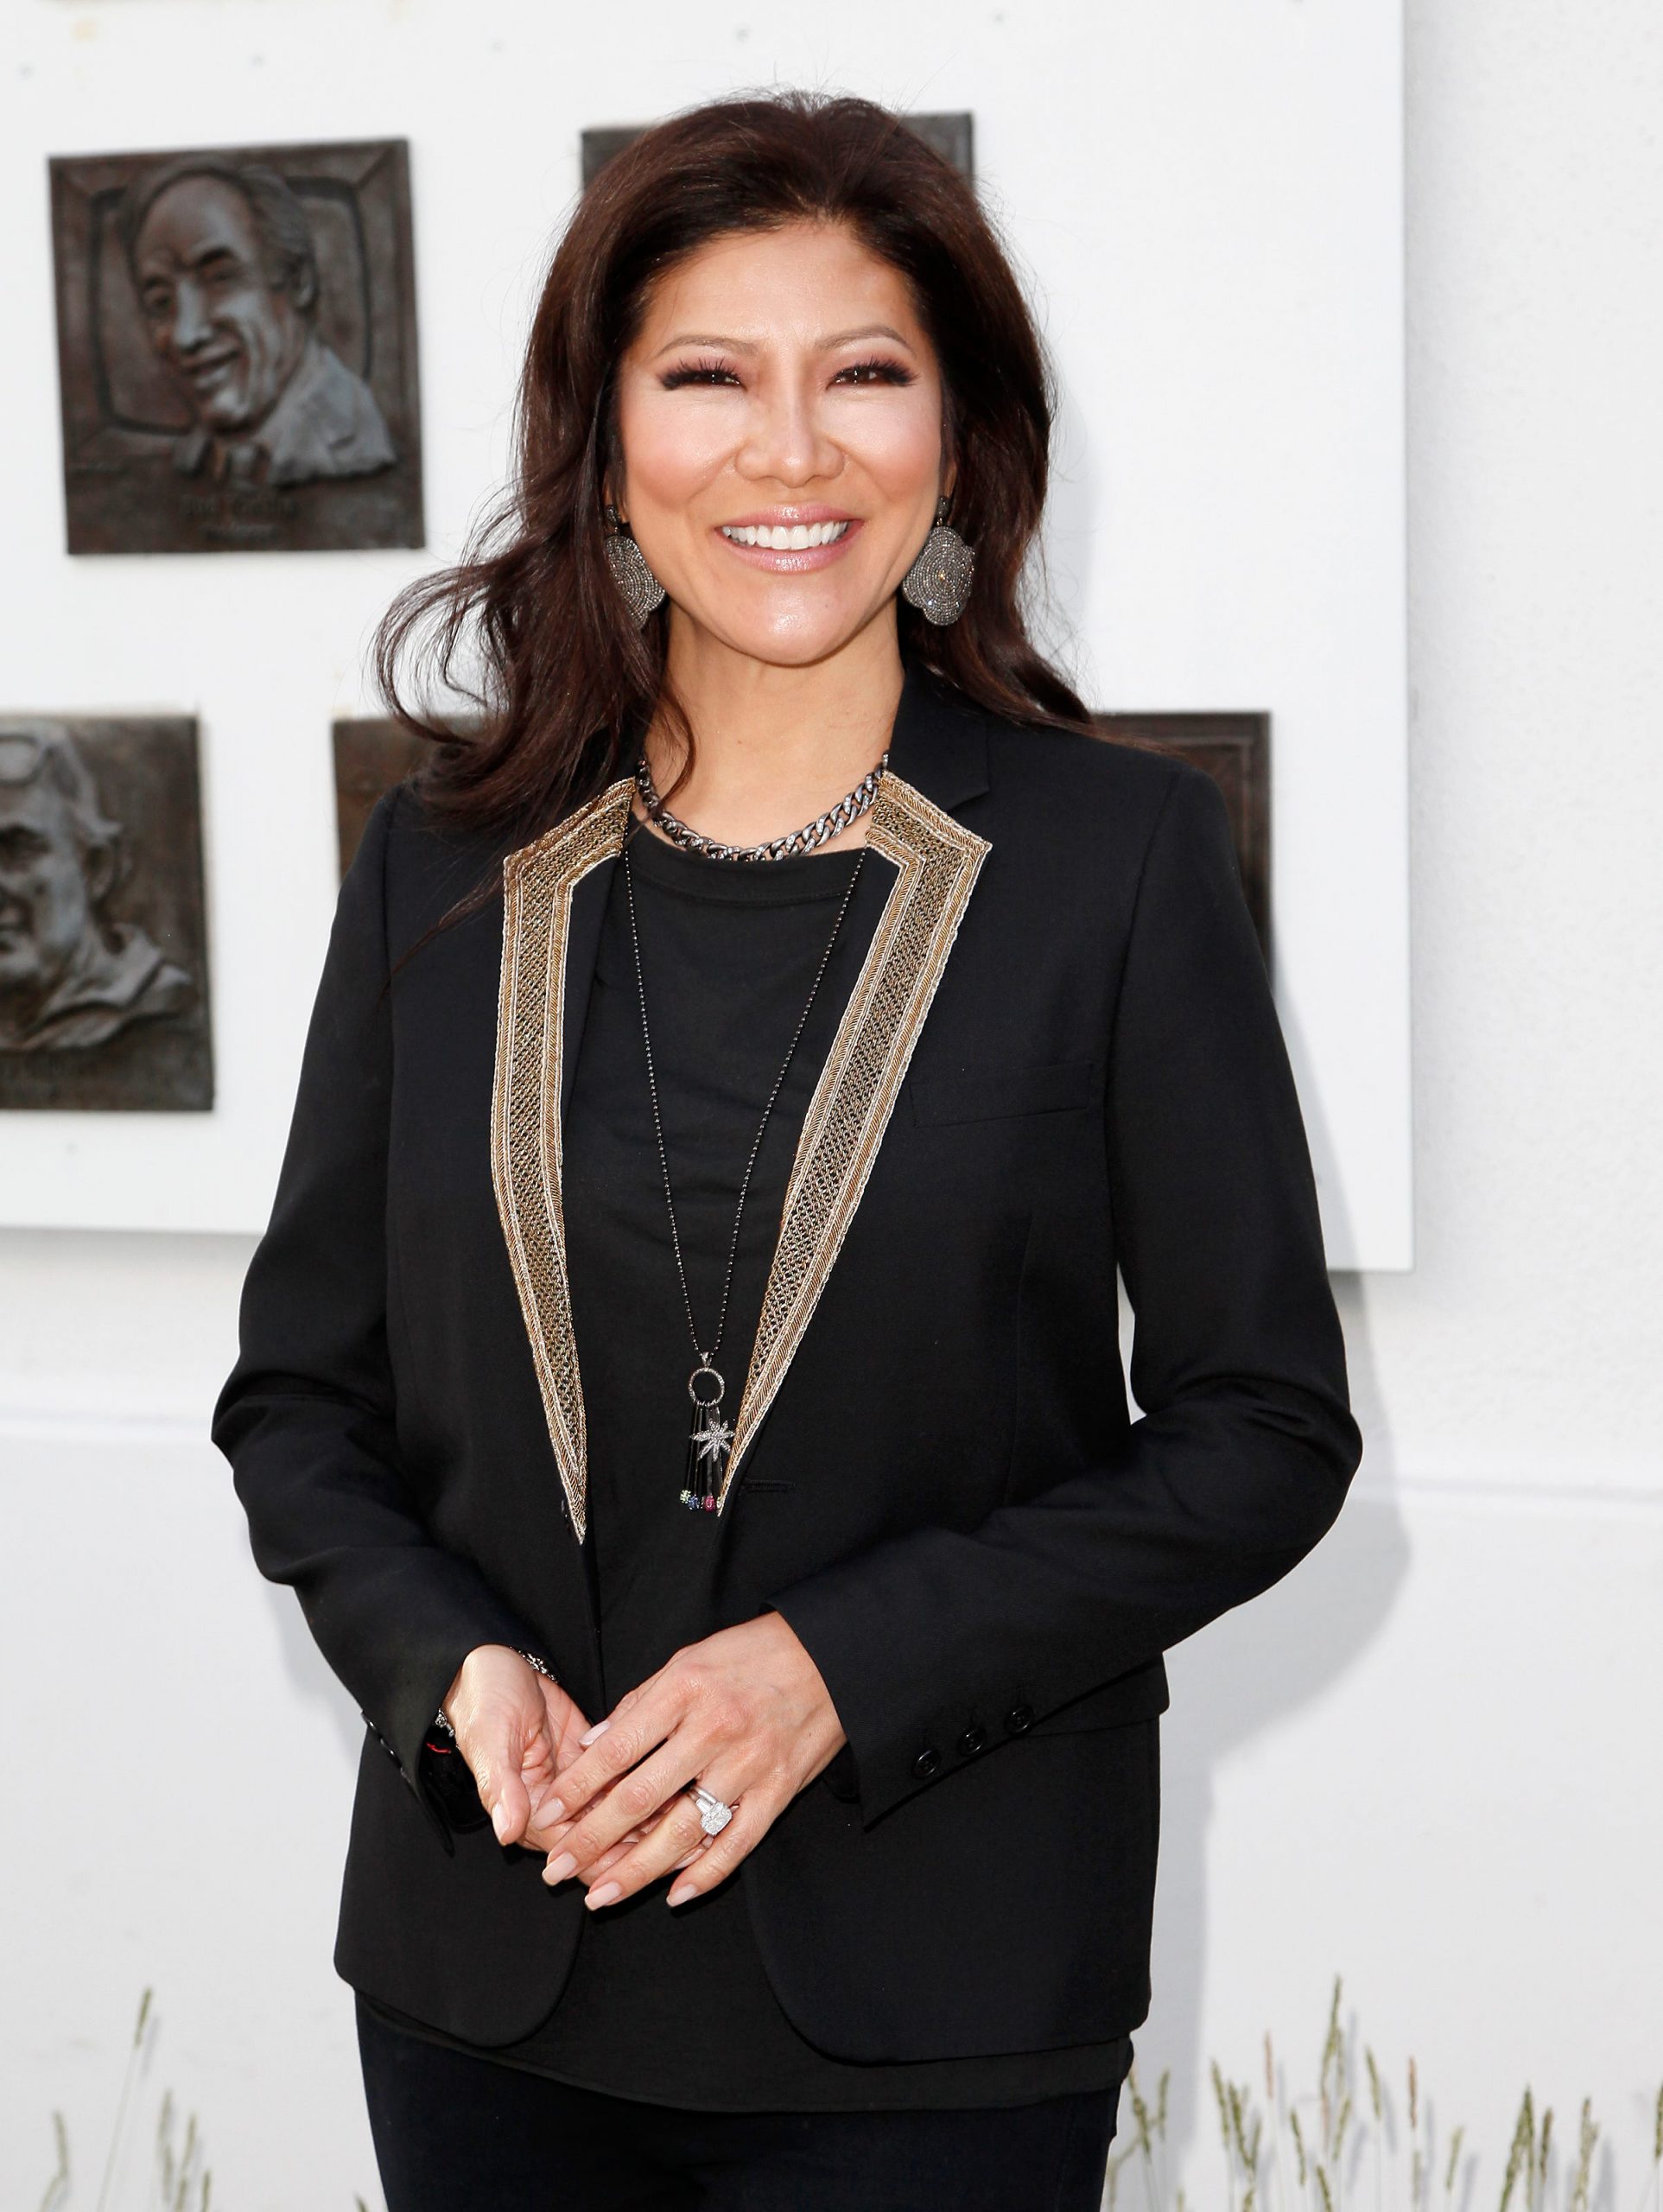 What is Julie Chen Moonves’ net worth